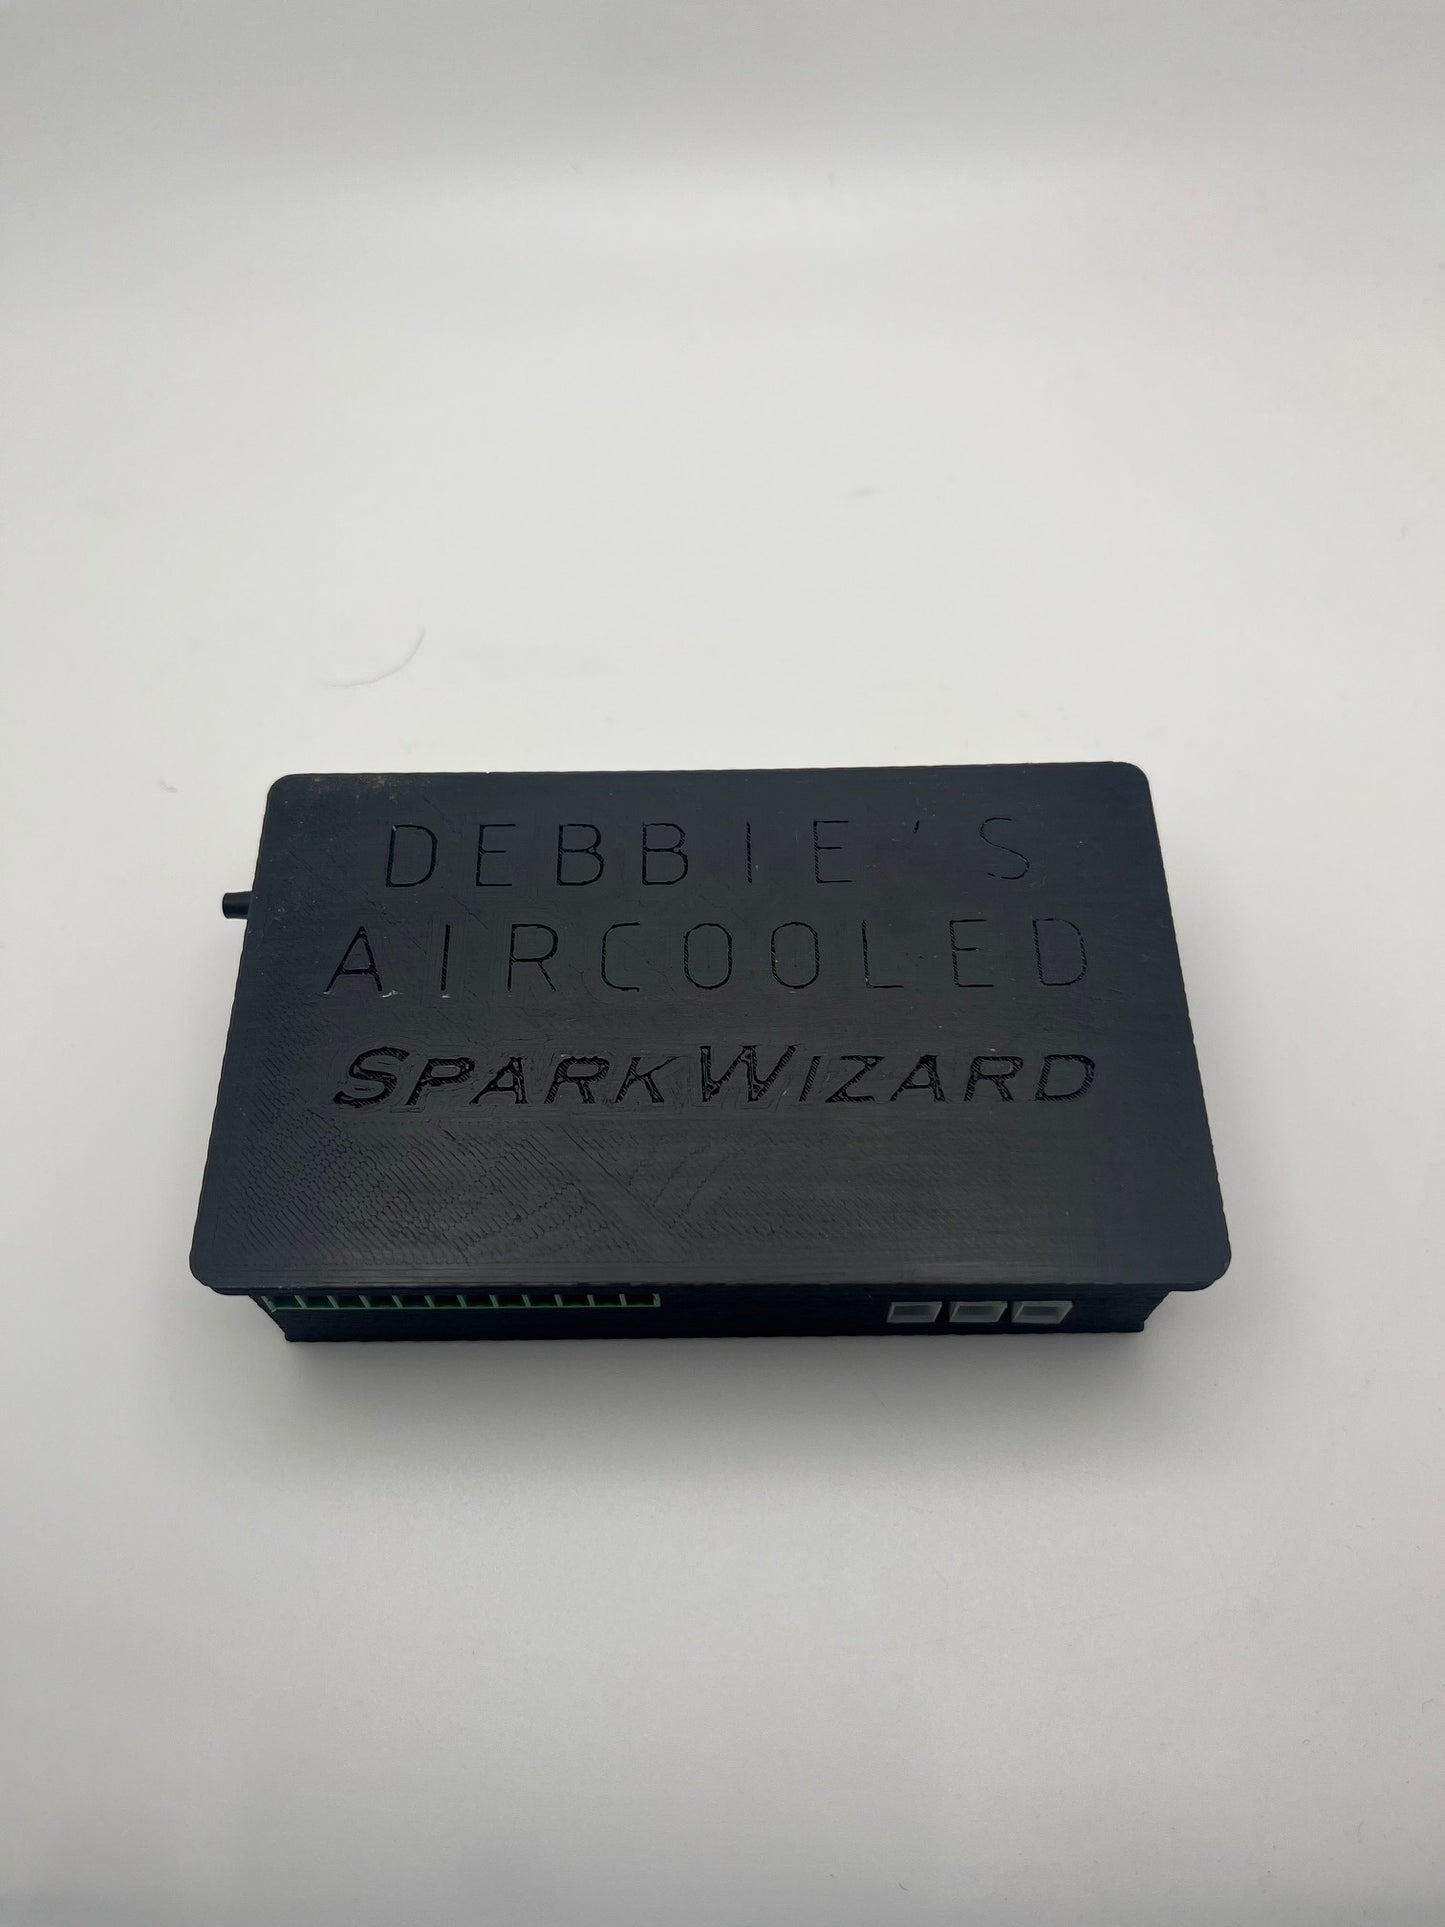 SparkWizard Programmable Timing Controller